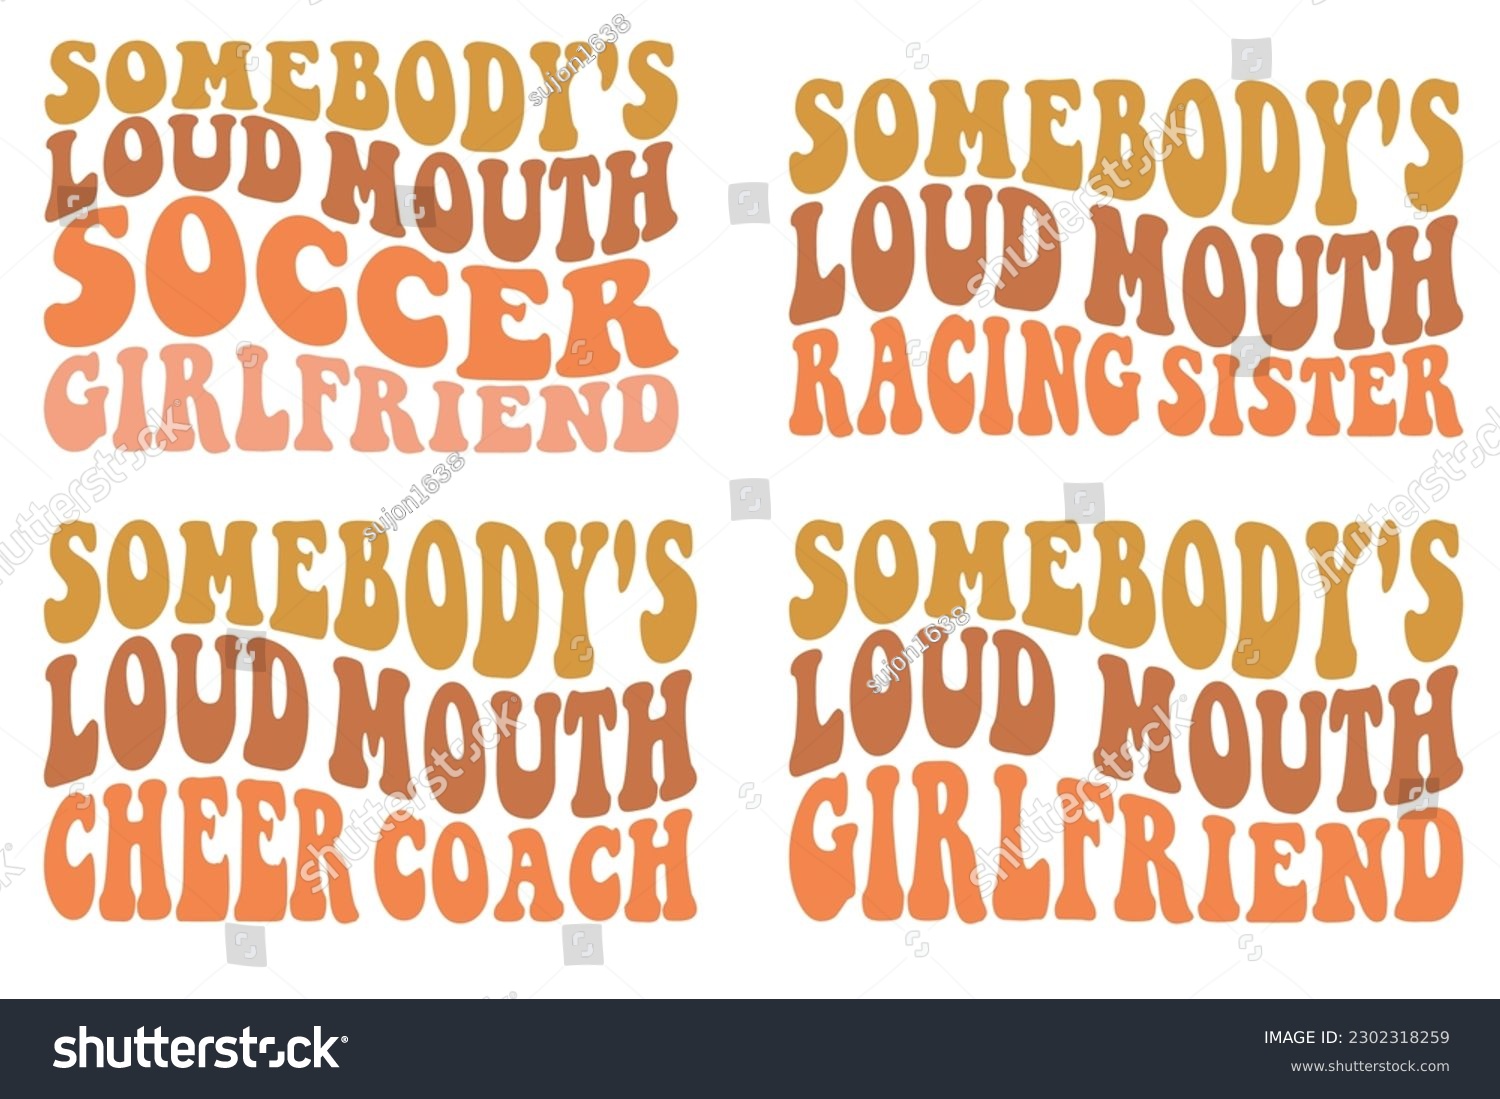 SVG of  Somebody's loud mouth soccer girlfriend, somebody's loud mouth racing sister, somebody loudmouth cheer coach, somebody's loud mouth girlfriend Wavy T-shirt svg